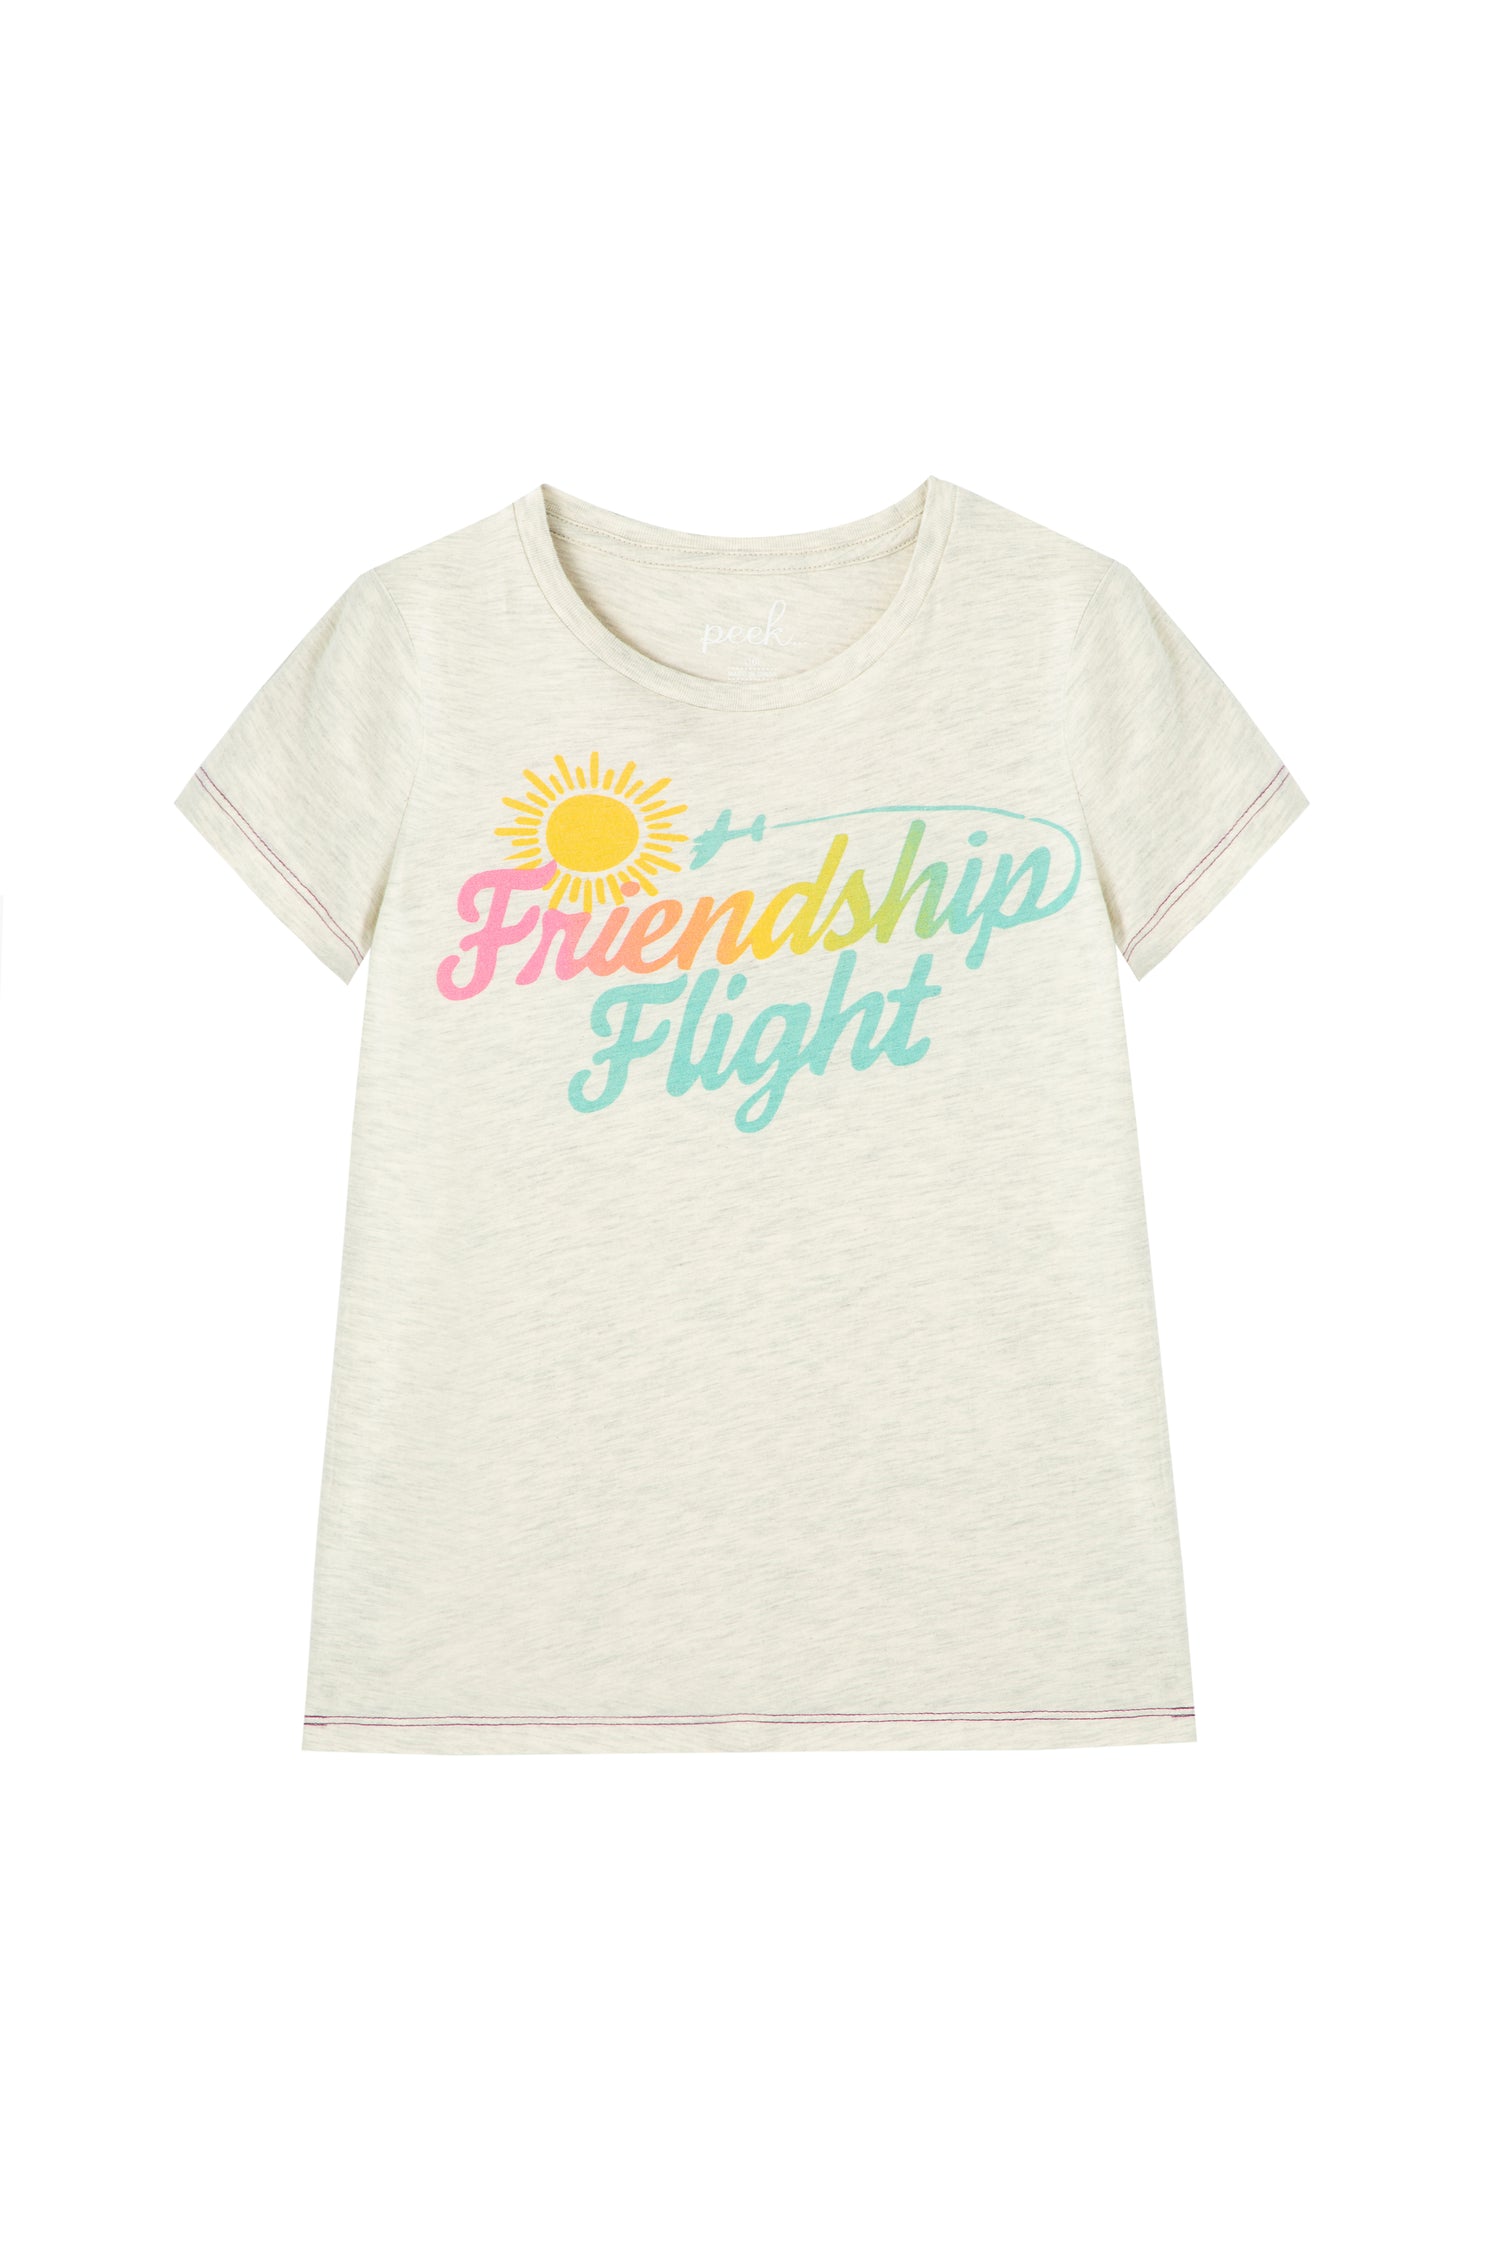 Gray t-shirt with illustrated sun and multi-colored 'friendship flight' text